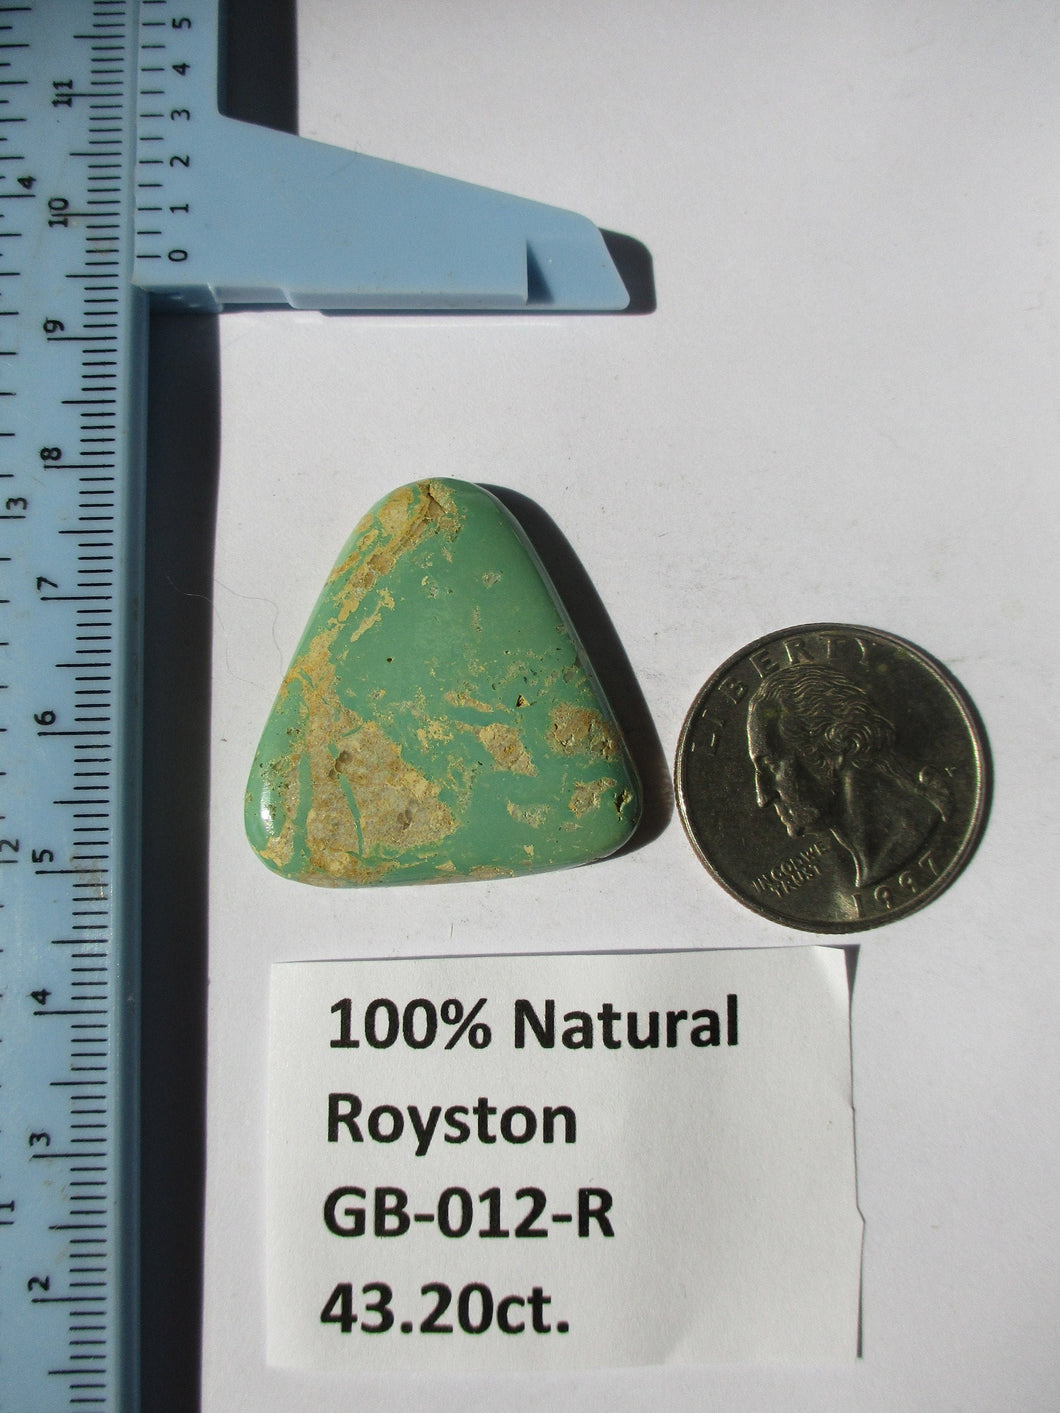 43.2 ct. (32x30x6 mm) 100% Natural Royston Turquoise Cabochon Gemstone, # GB 012